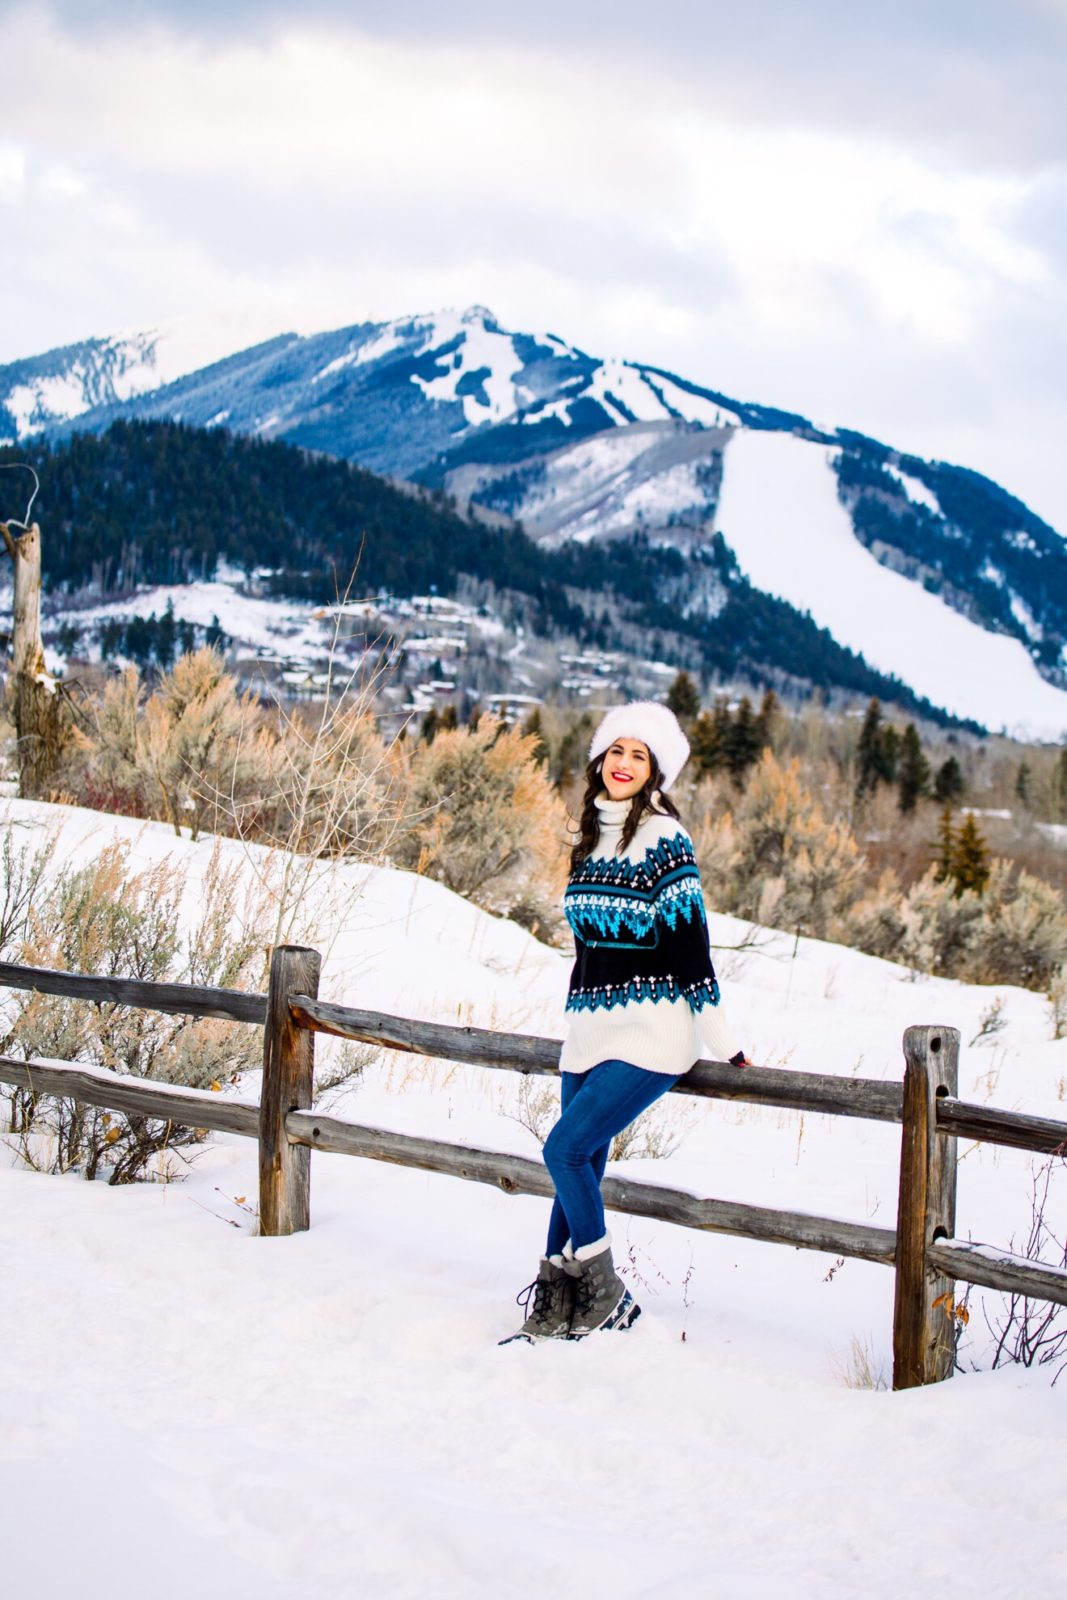 Ski Resort Style featured by top US fashion blogger Laura Lily; Image of a woman wearing Topshop Sweater, Mott & Bow Jeans, Sorel boots, NOAKE hat and Aldo sunglasses.